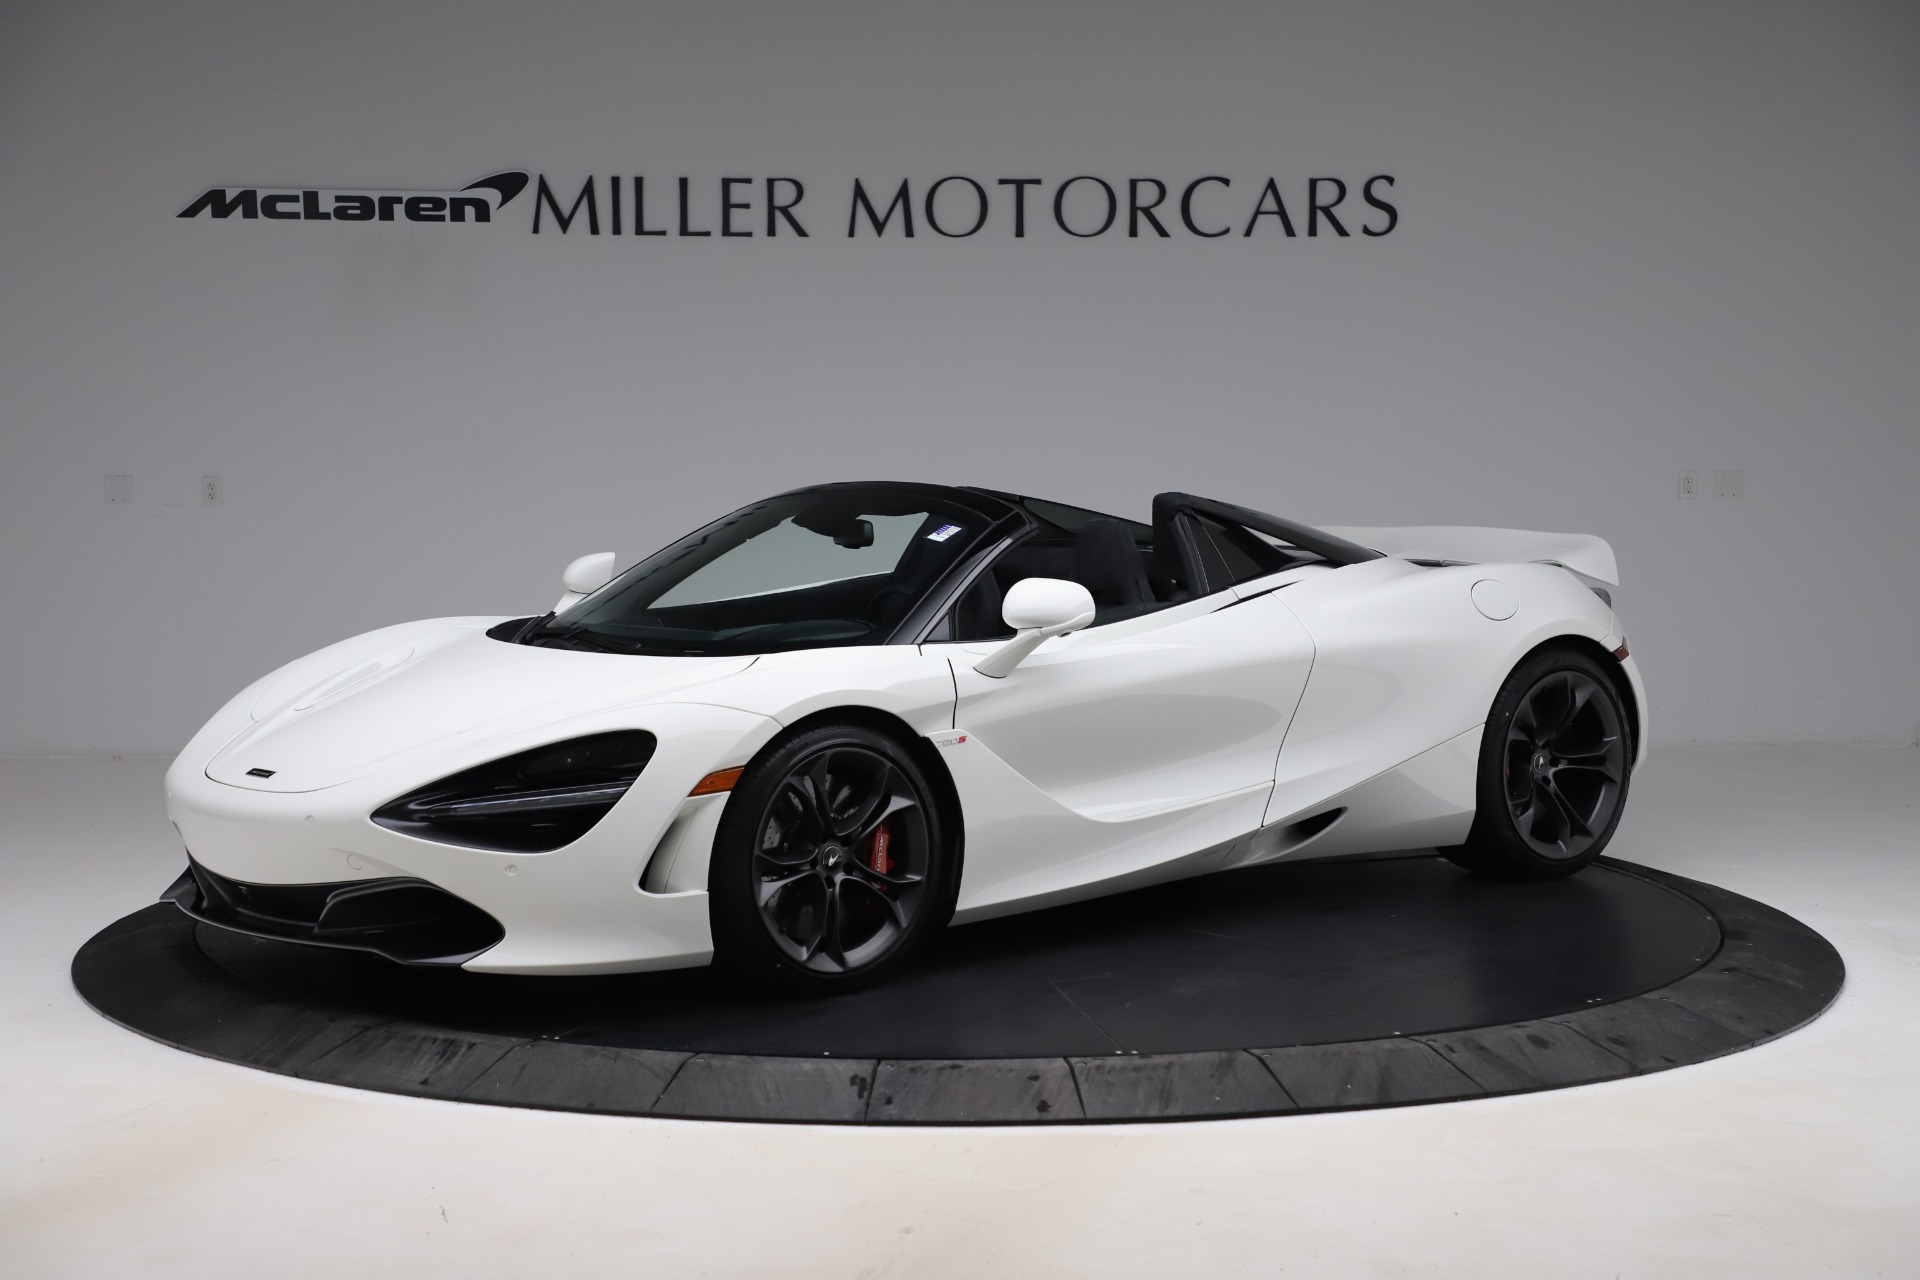 Used 2020 McLaren 720S Spider for sale $317,500 at Aston Martin of Greenwich in Greenwich CT 06830 1